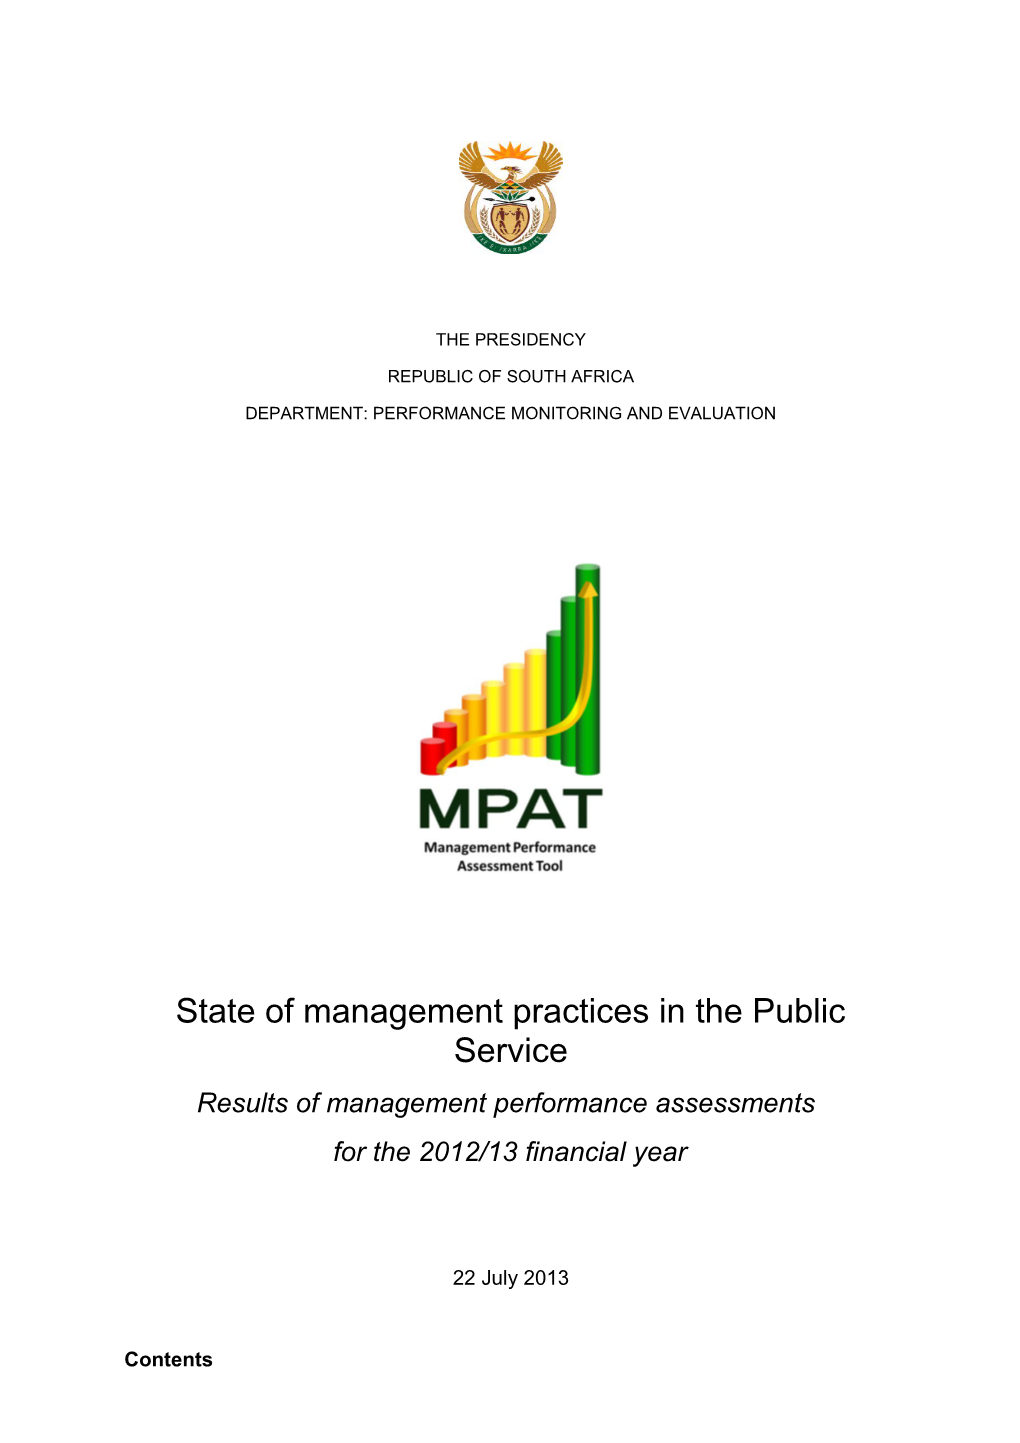 Department: Performance Monitoring and Evaluation